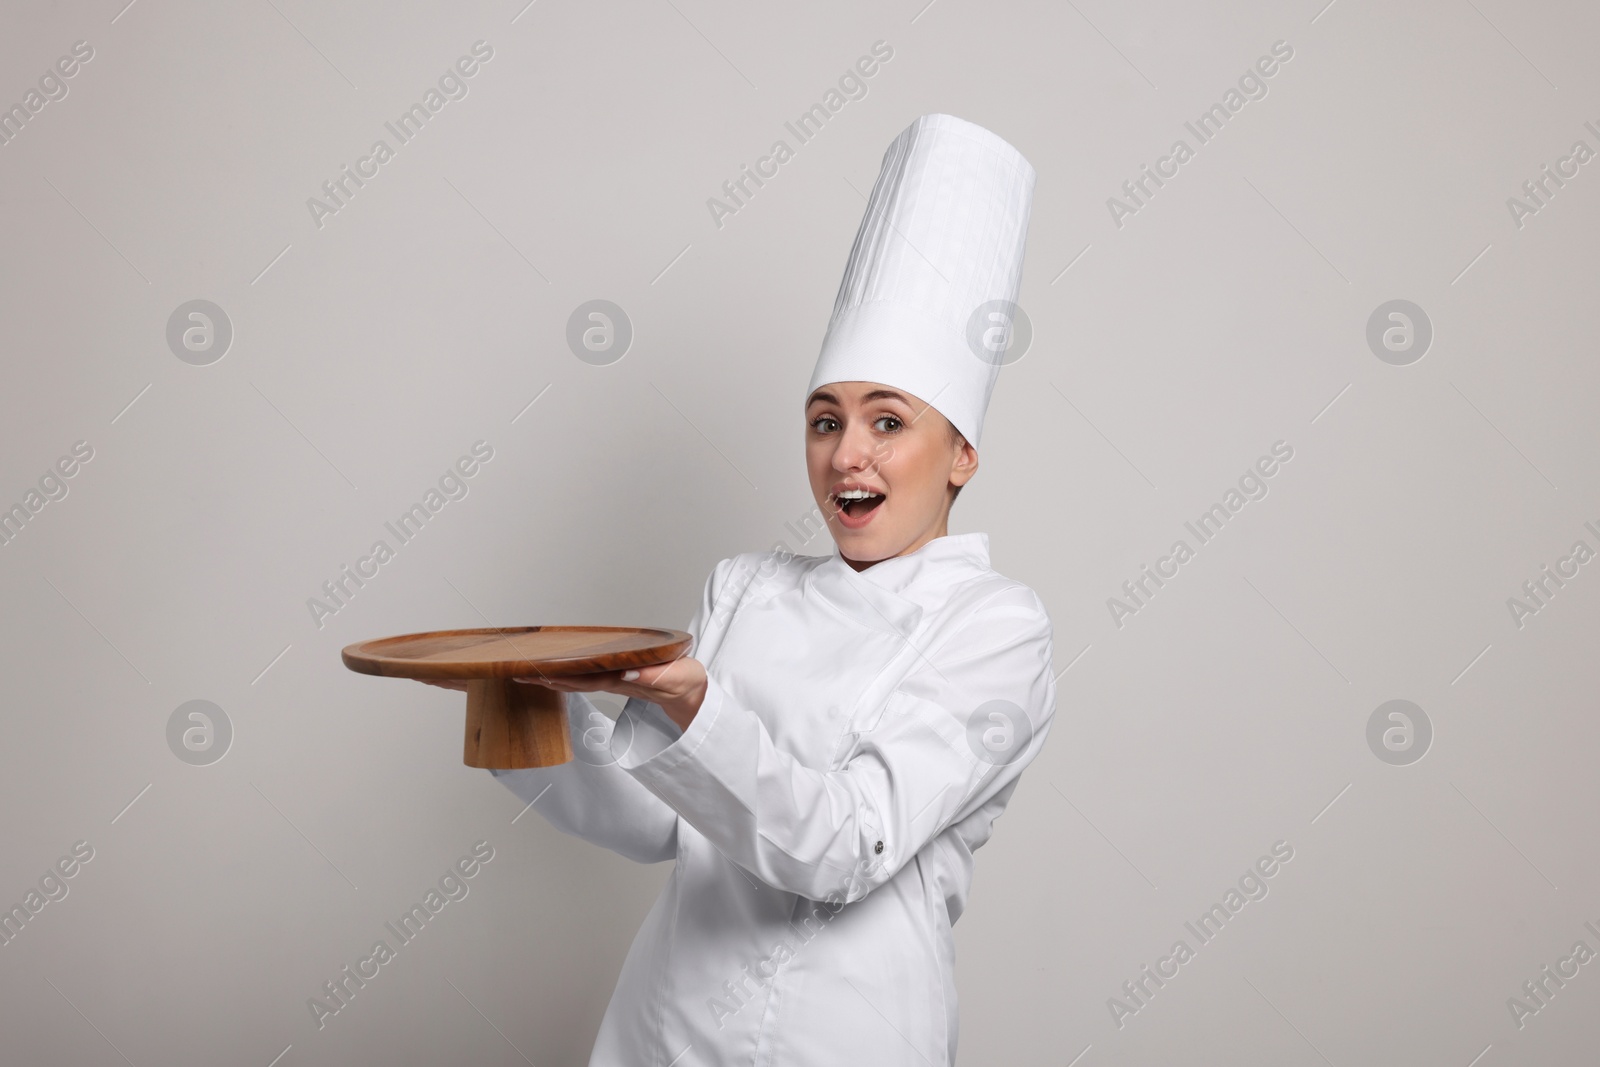 Photo of Happy professional confectioner in uniform holding empty cake stand on light grey background